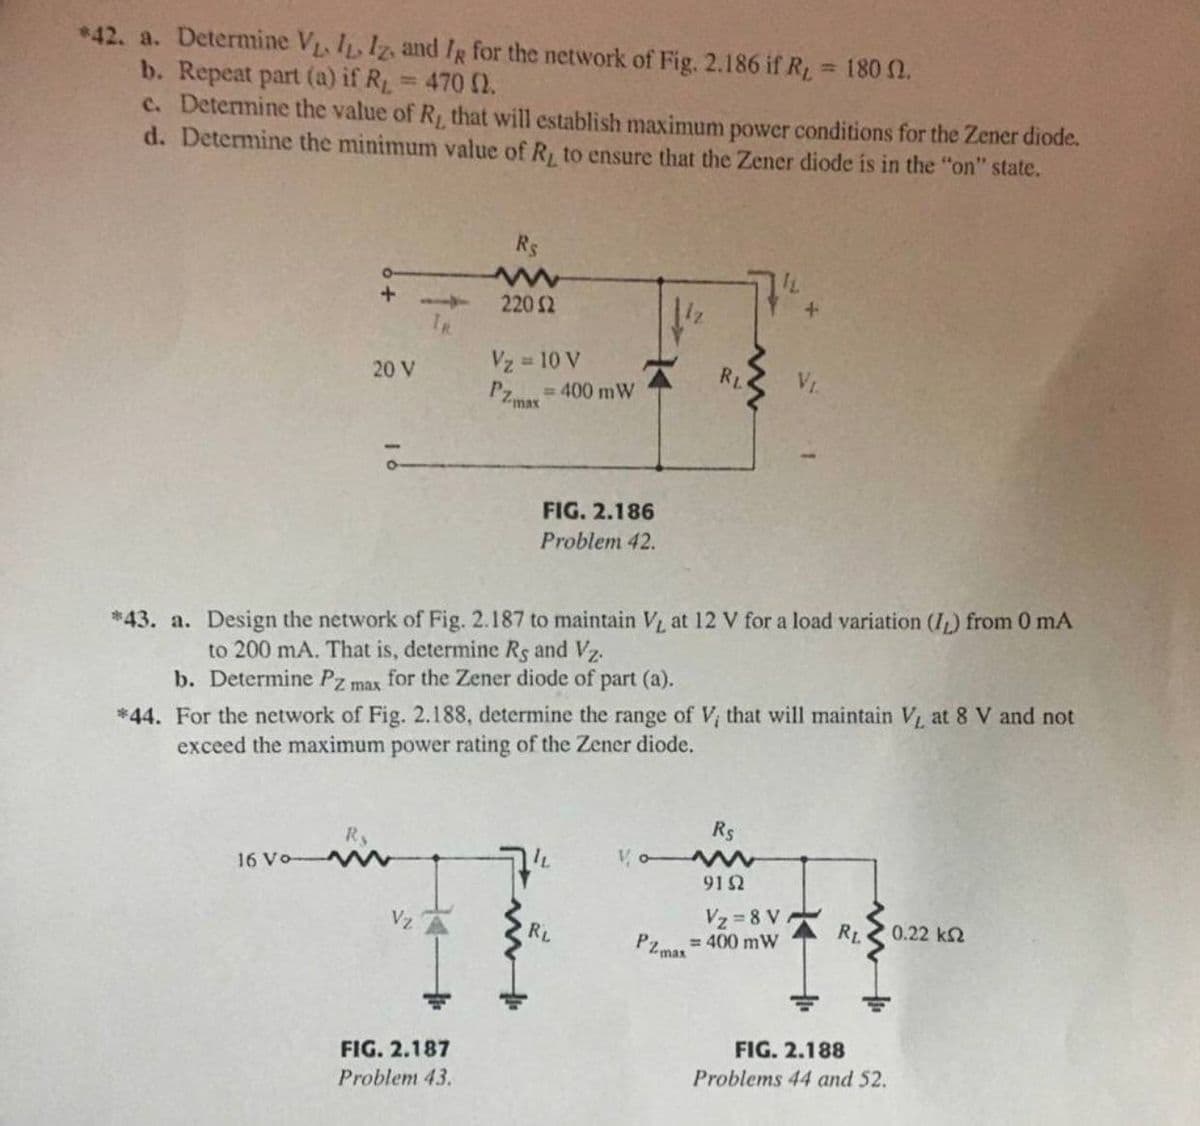 *42. a. Determine VL. IL, Iz, and Ig for the network of Fig. 2.186 if RL 180 0.
b. Repeat part (a) if R 470 2.
c. Determine the value of R, that will establish maximum power conditions for the Zener diode.
d. Determine the minimum value of R, to ensure that the Zener diode is in the "on" state.
Rs
220 2
TR
Vz 10 V
RL
%3D
20 V
= 400 mW
PZmat
FIG. 2.186
Problem 42.
*43. a. Design the network of Fig. 2.187 to maintain V at 12 V for a load variation (I,) from 0 mA
to 200 mA. That is, determine Rs and Vz.
b. Determine Pz max
for the Zener diode of part (a).
*44. For the network of Fig. 2.188, determine the range of V, that will maintain V at 8 V and not
exceed the maximum power rating of the Zener diode.
Rs
16 Vo
91 2
Vz 8 V
0.22 k2
Vz
RL
RL
= 400 mW
PZ max
FIG. 2.188
FIG. 2.187
Problems 44 and 52.
Problem 43.
